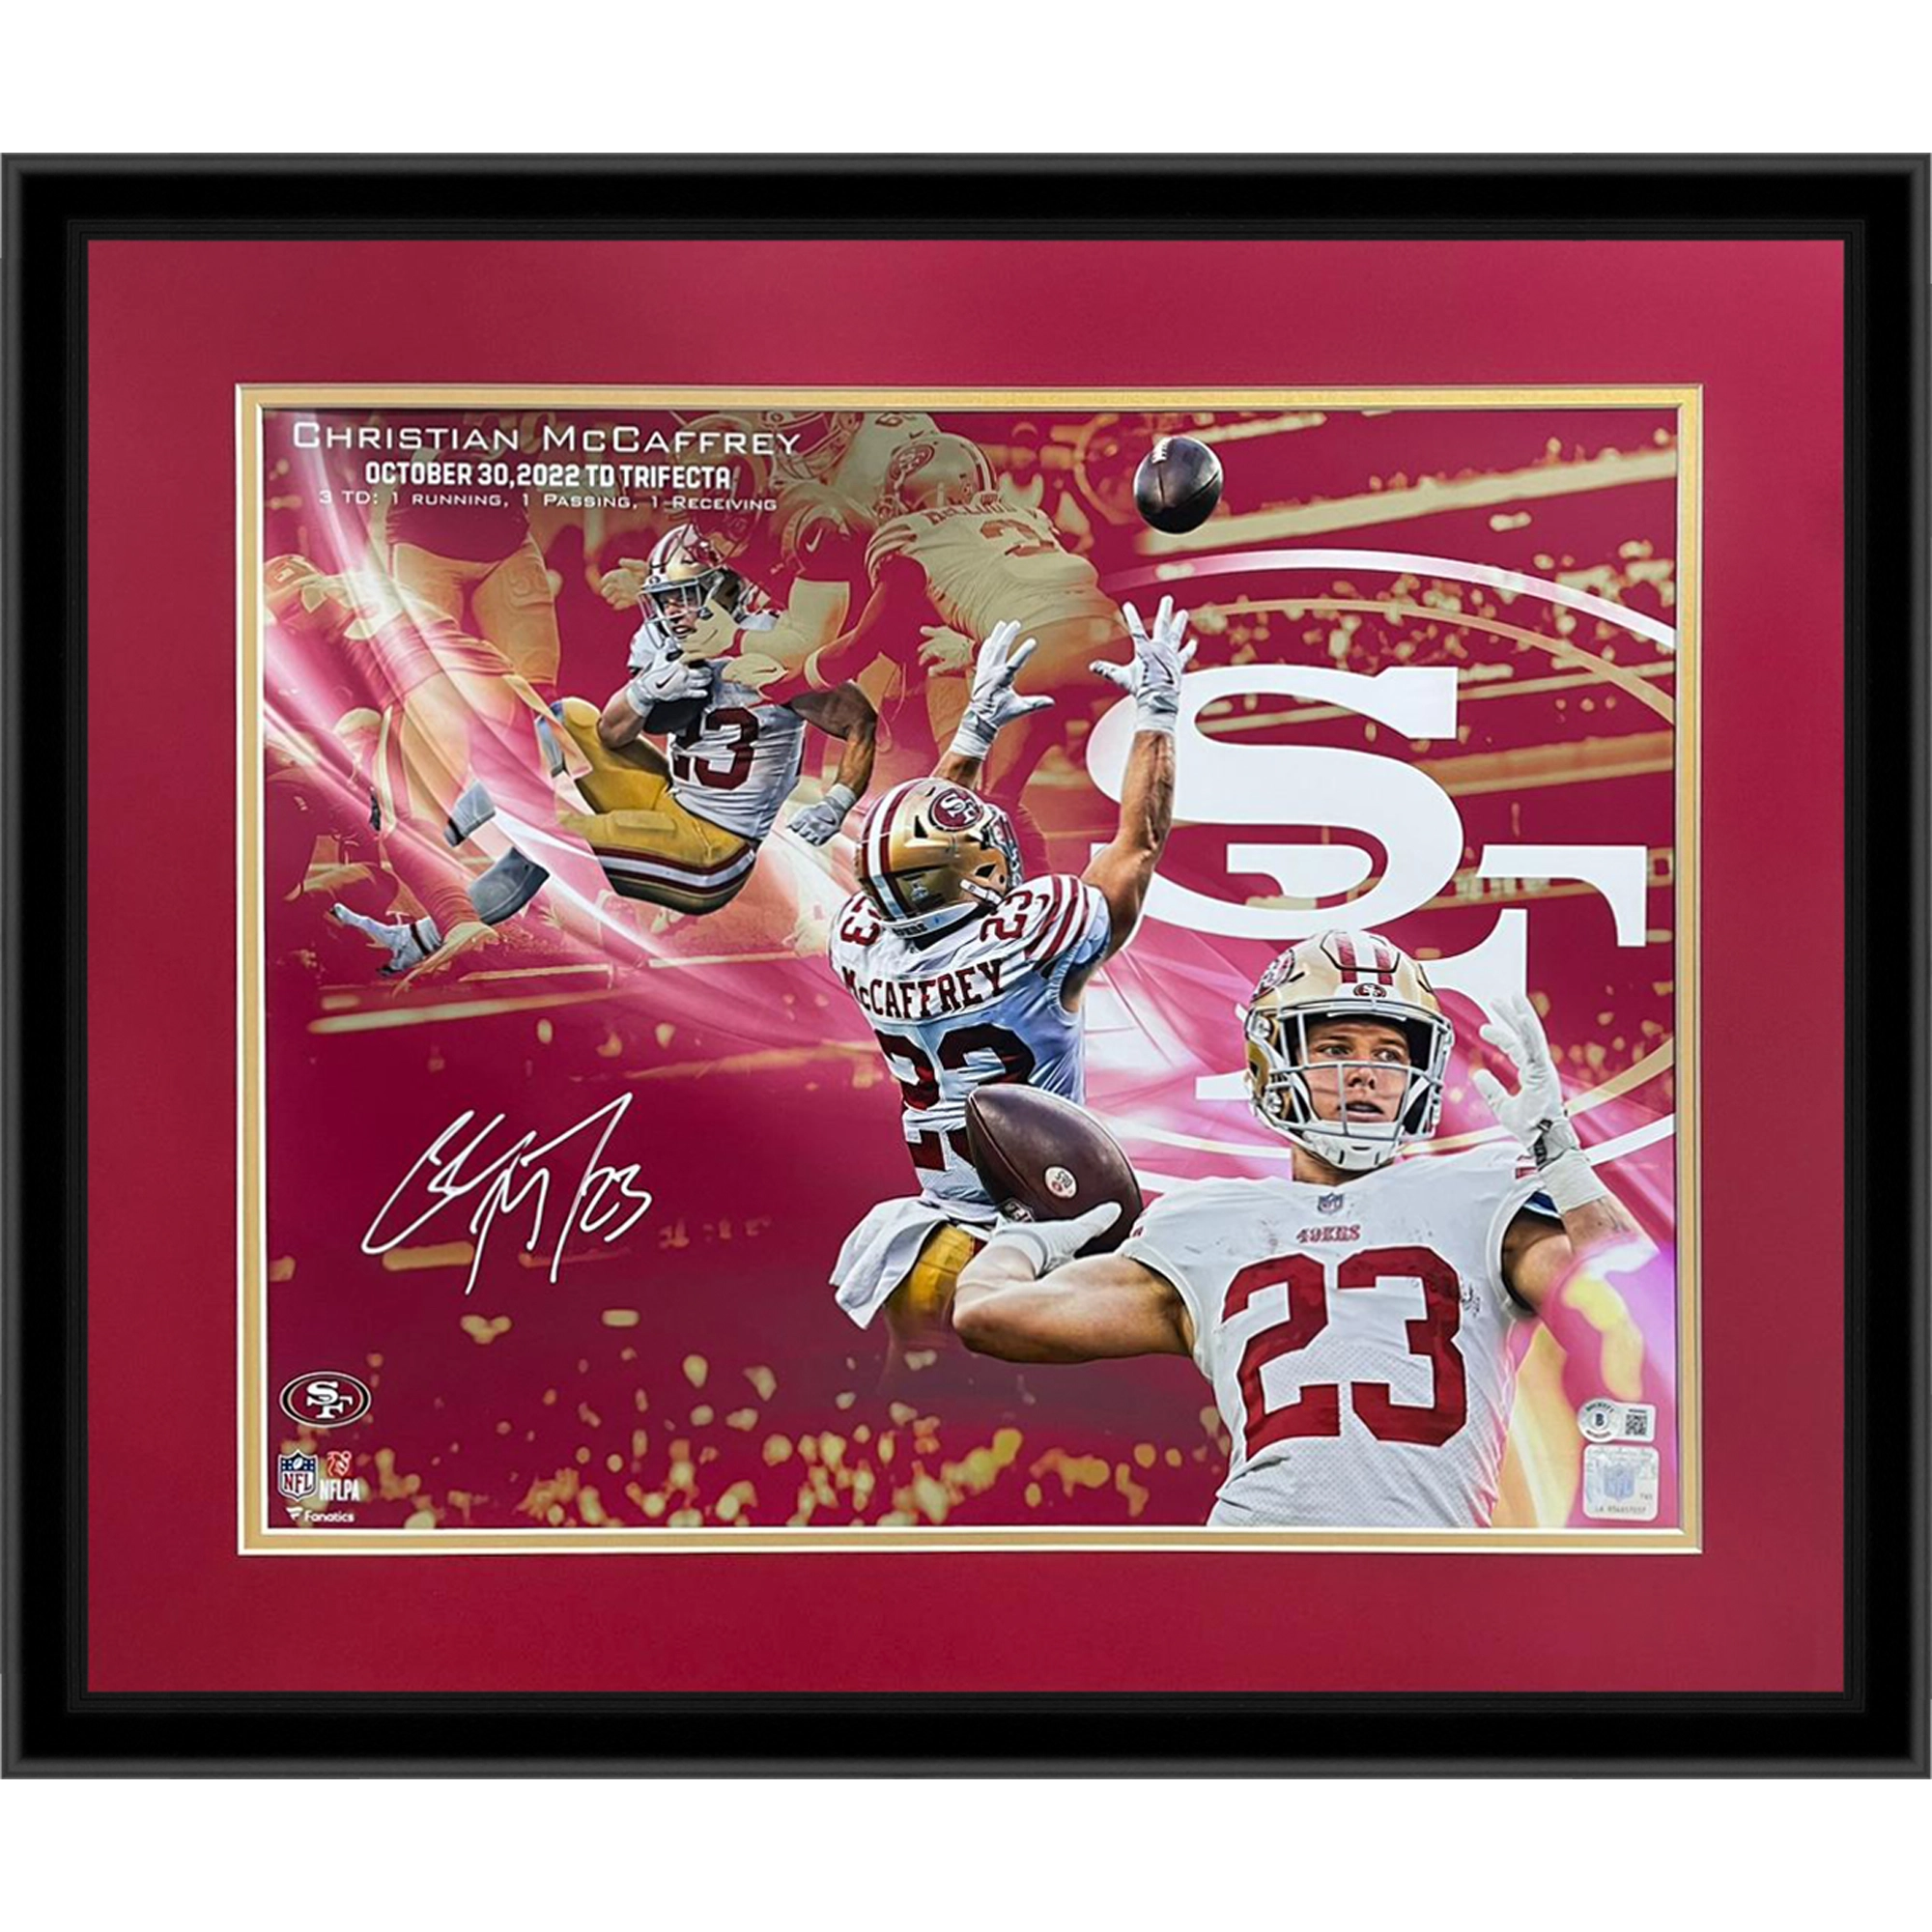 Christian McCaffrey Autographed San Francisco 49ers (Rushing Receiving Passing Touchdown Trifecta) Deluxe Framed 16x20 Photo - Beckett